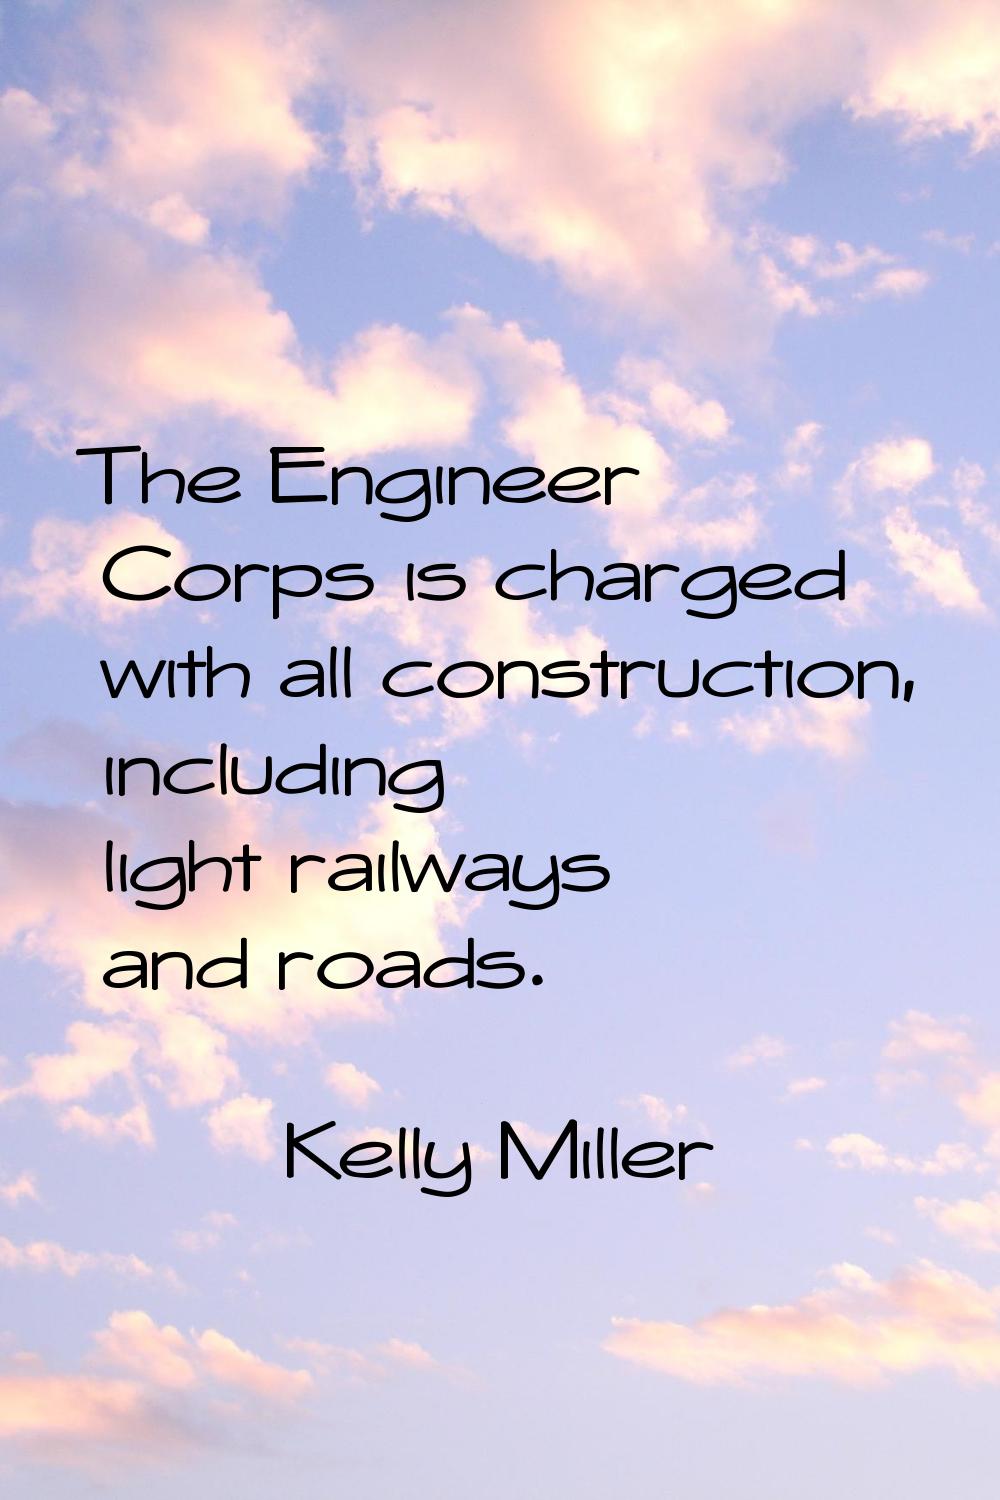 The Engineer Corps is charged with all construction, including light railways and roads.